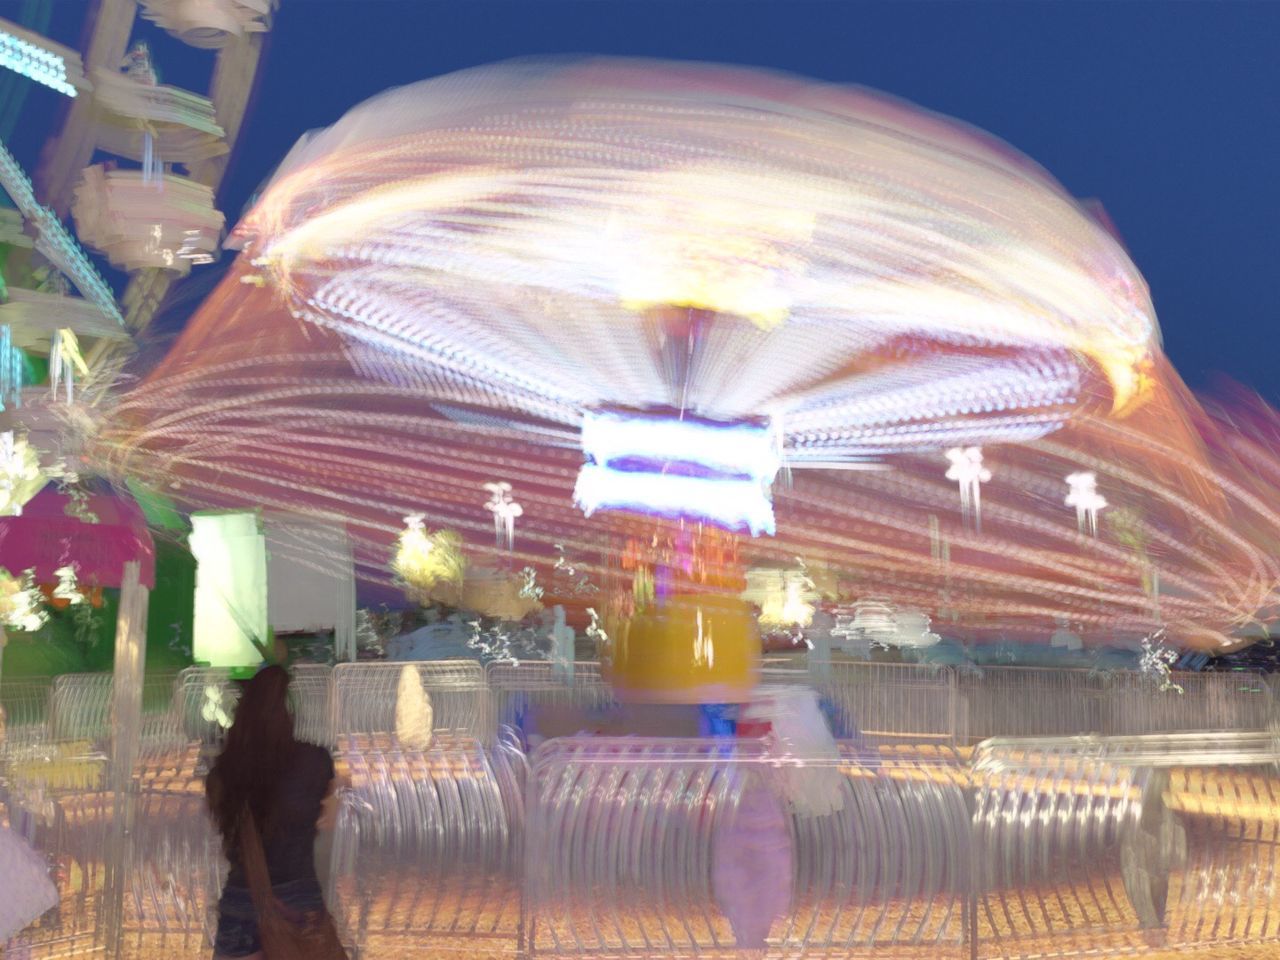 BLURRED MOTION OF PEOPLE IN CITY AT NIGHT